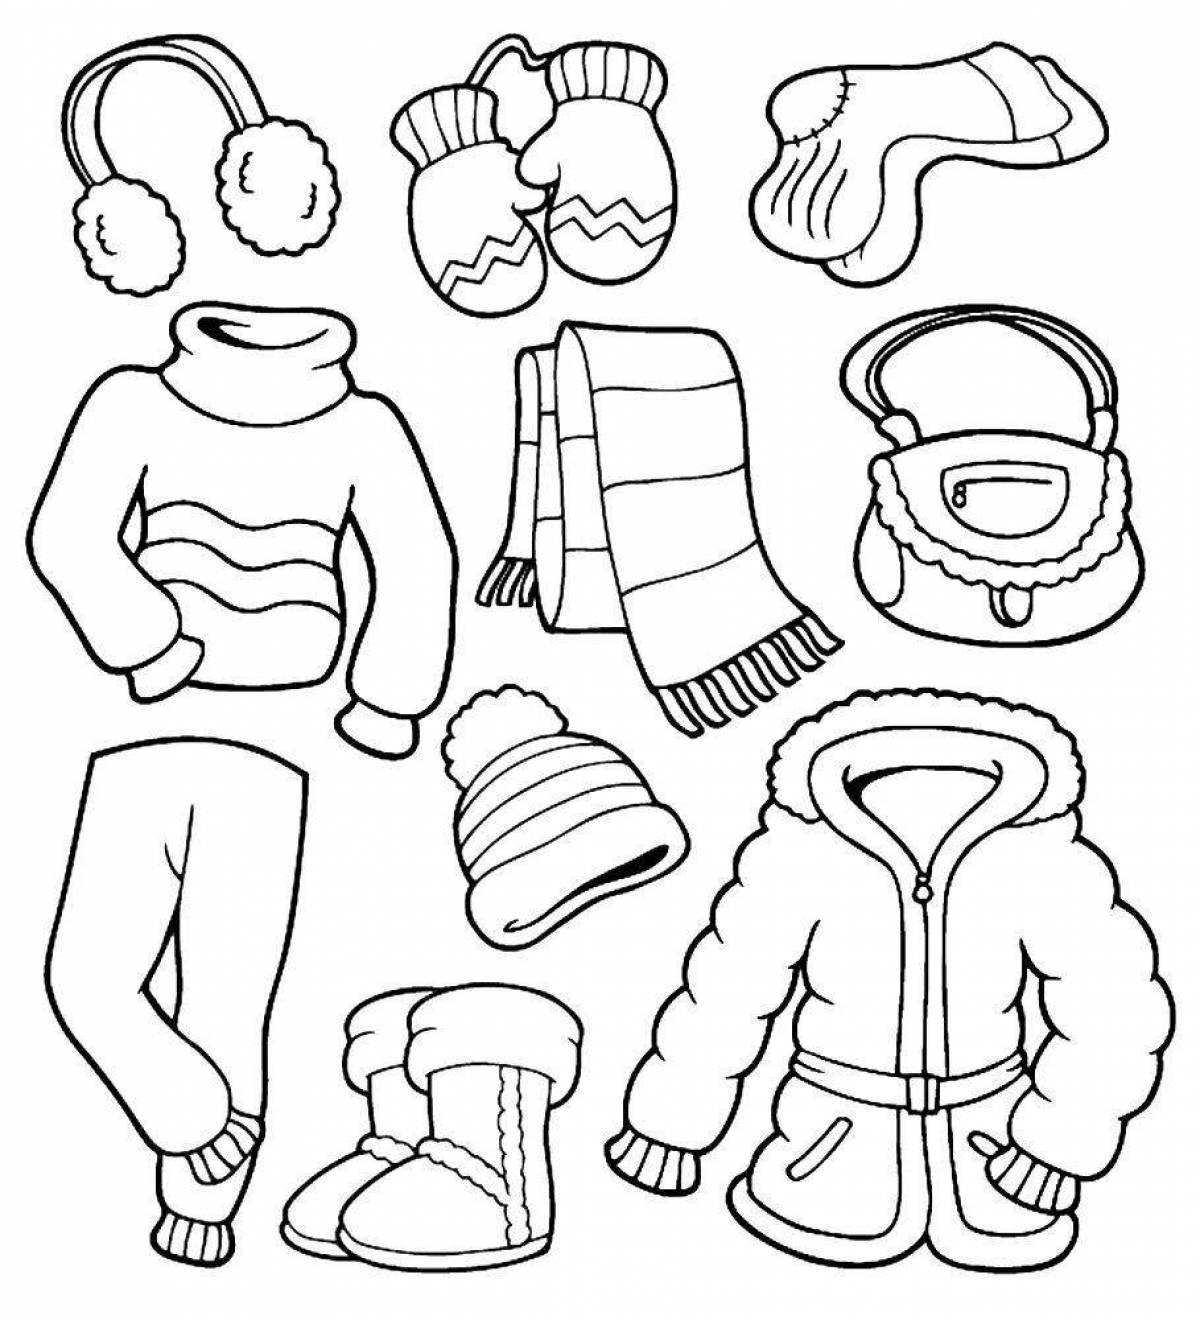 Colorful winter clothes coloring page for 4-5 year olds